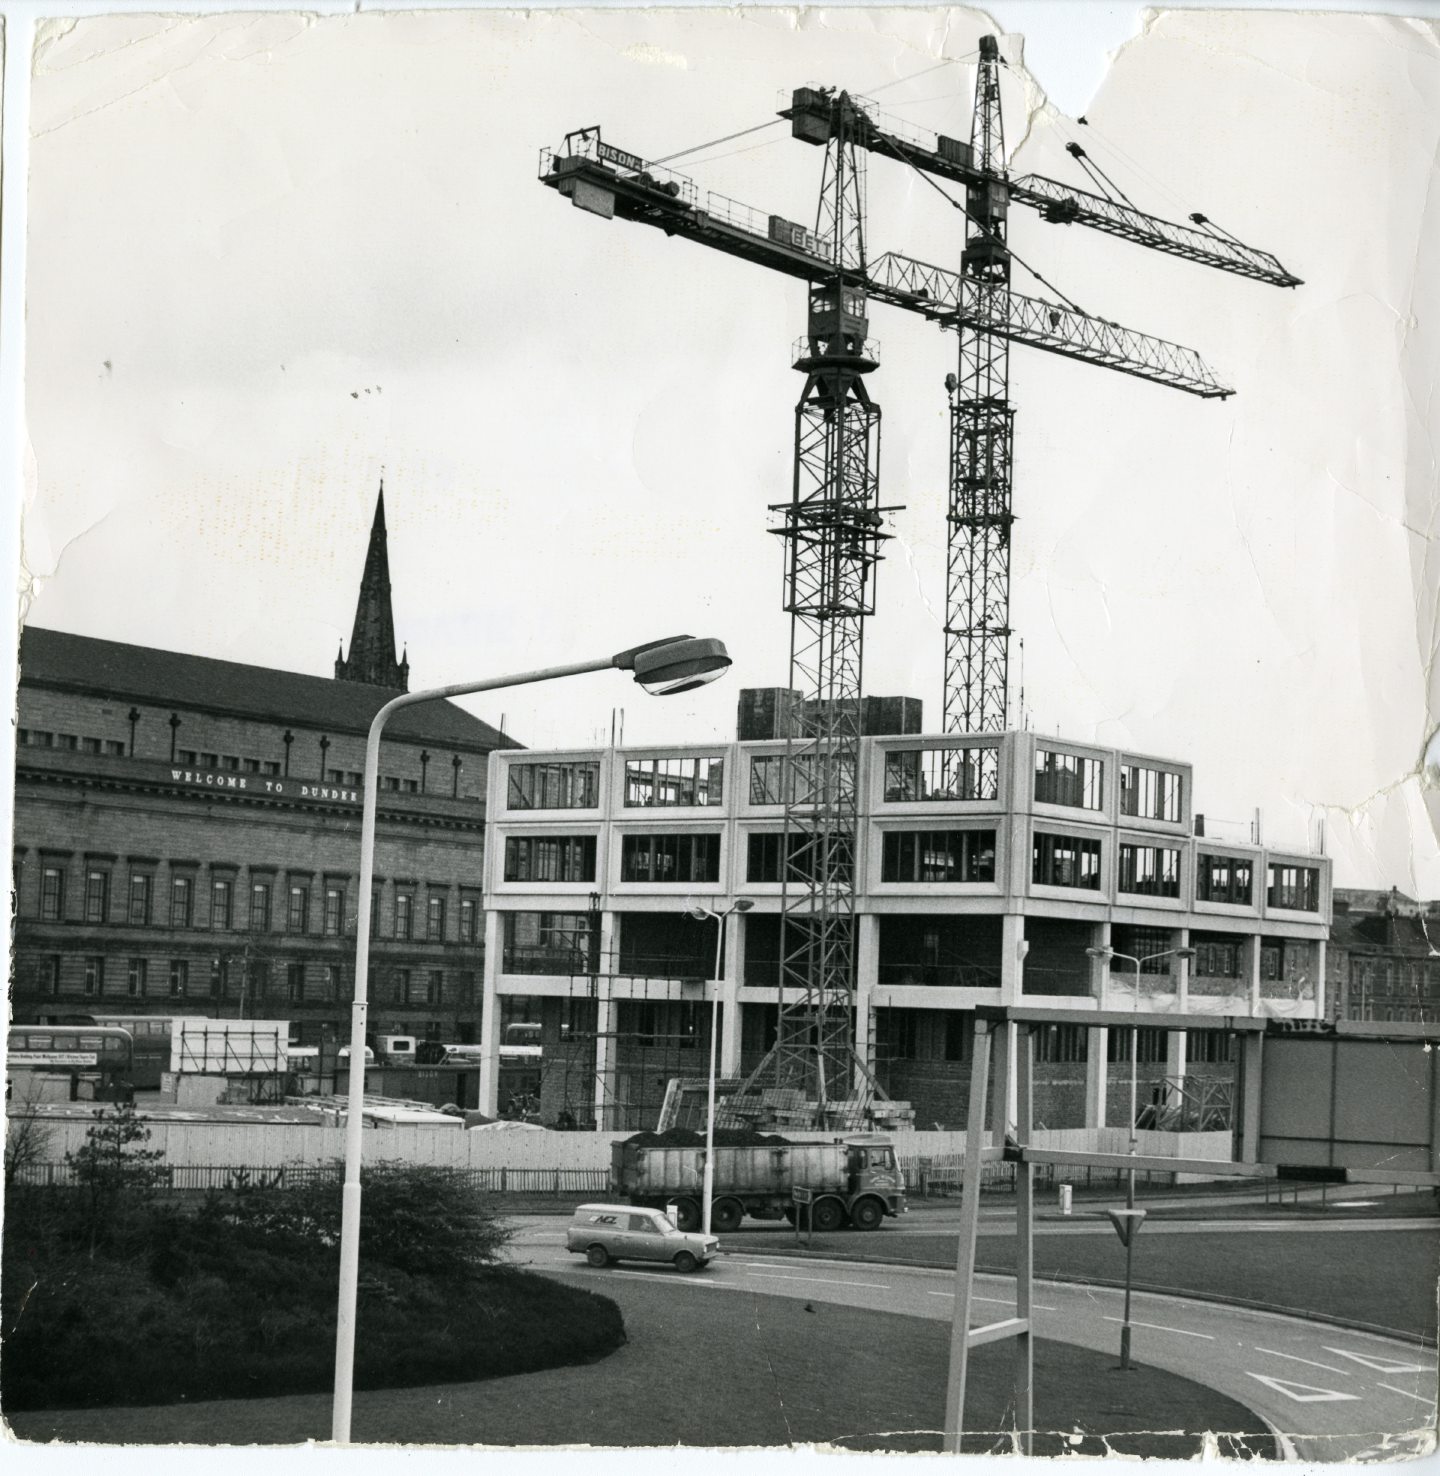 The new office block on Shore Terrace under construction which became Tayside House. Image: DC Thomson.